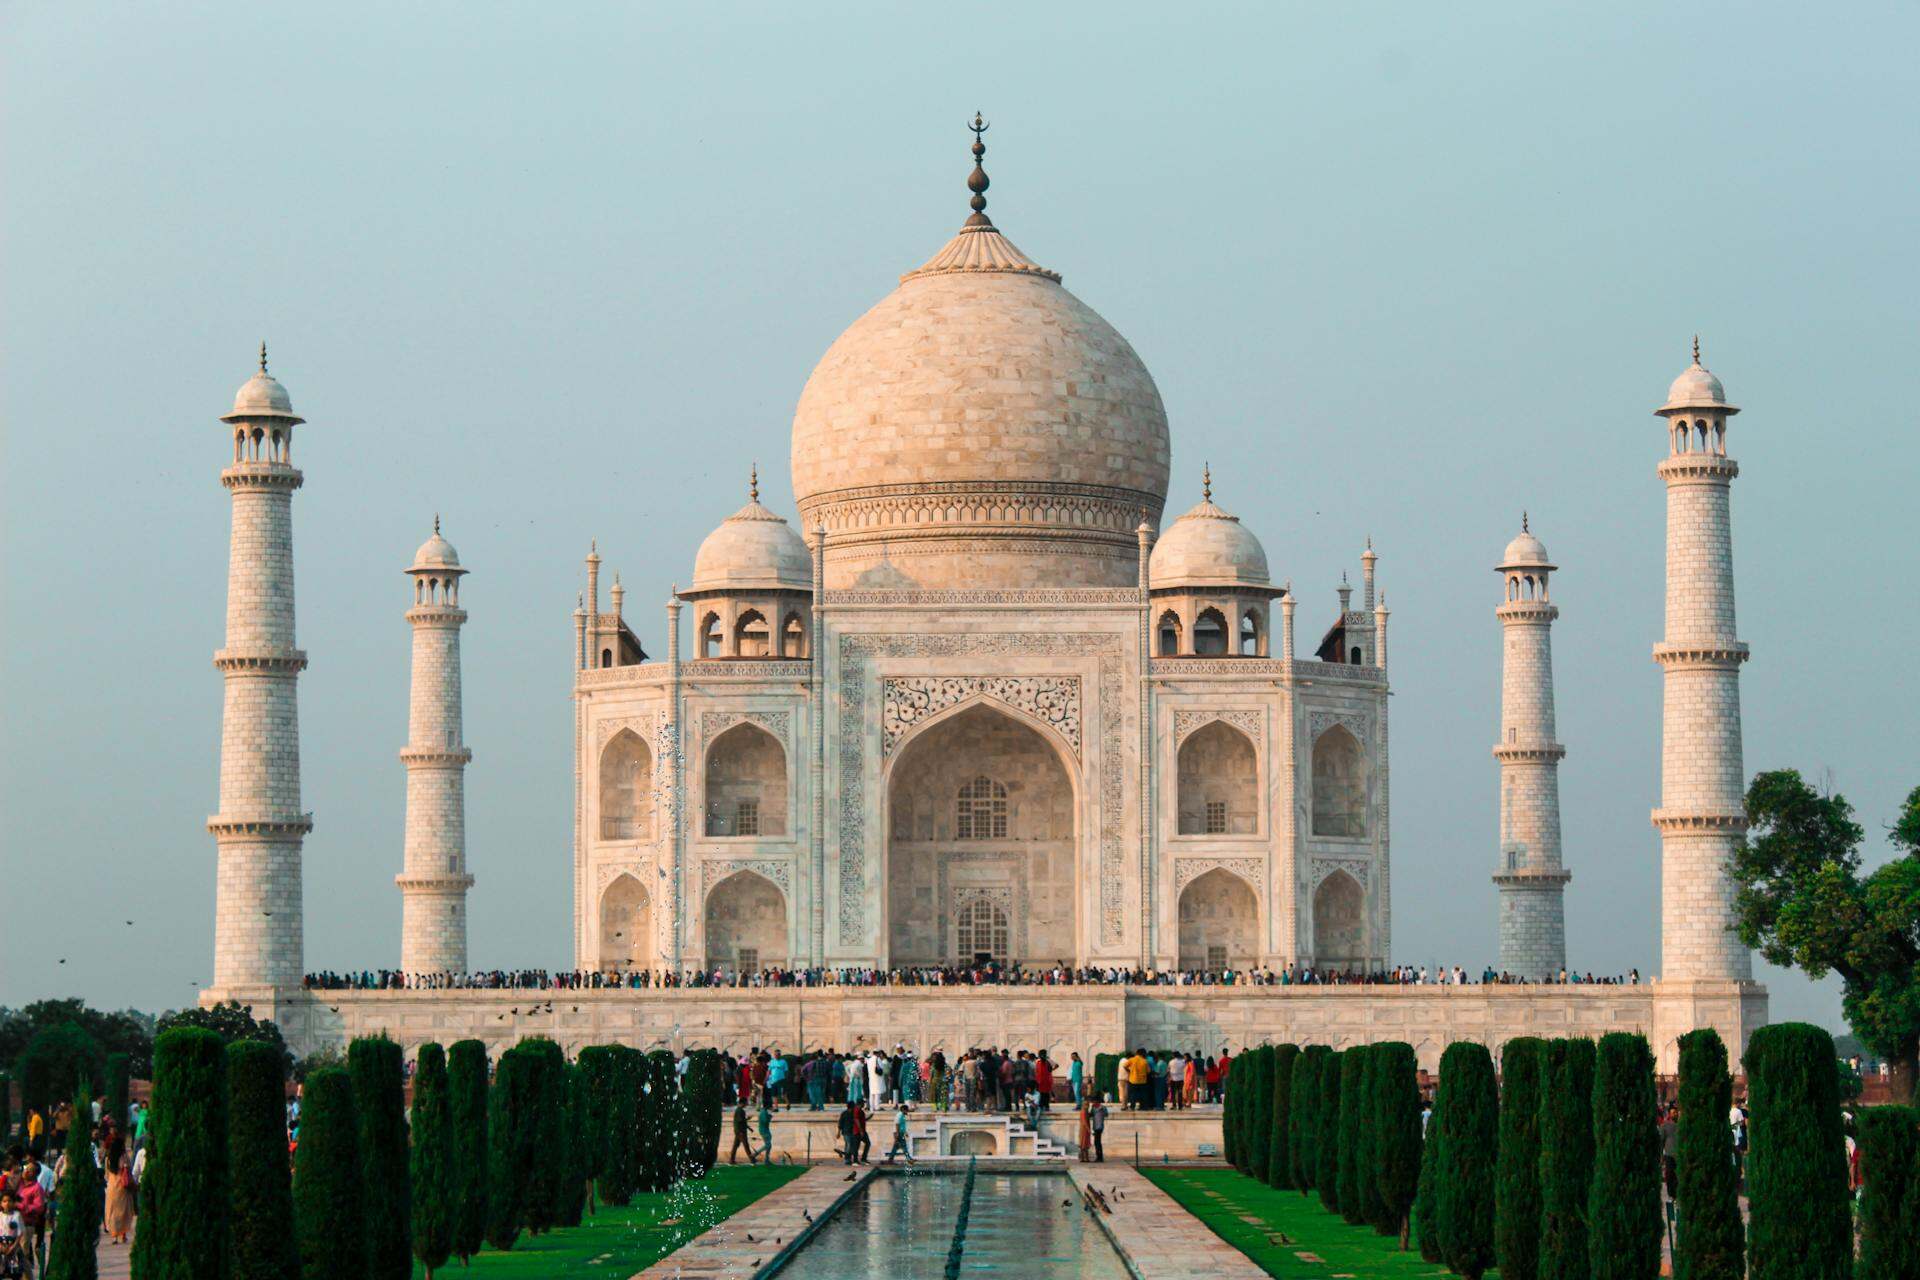 Taj Mahal and the Four Minarets, Tourist attractions in Agra